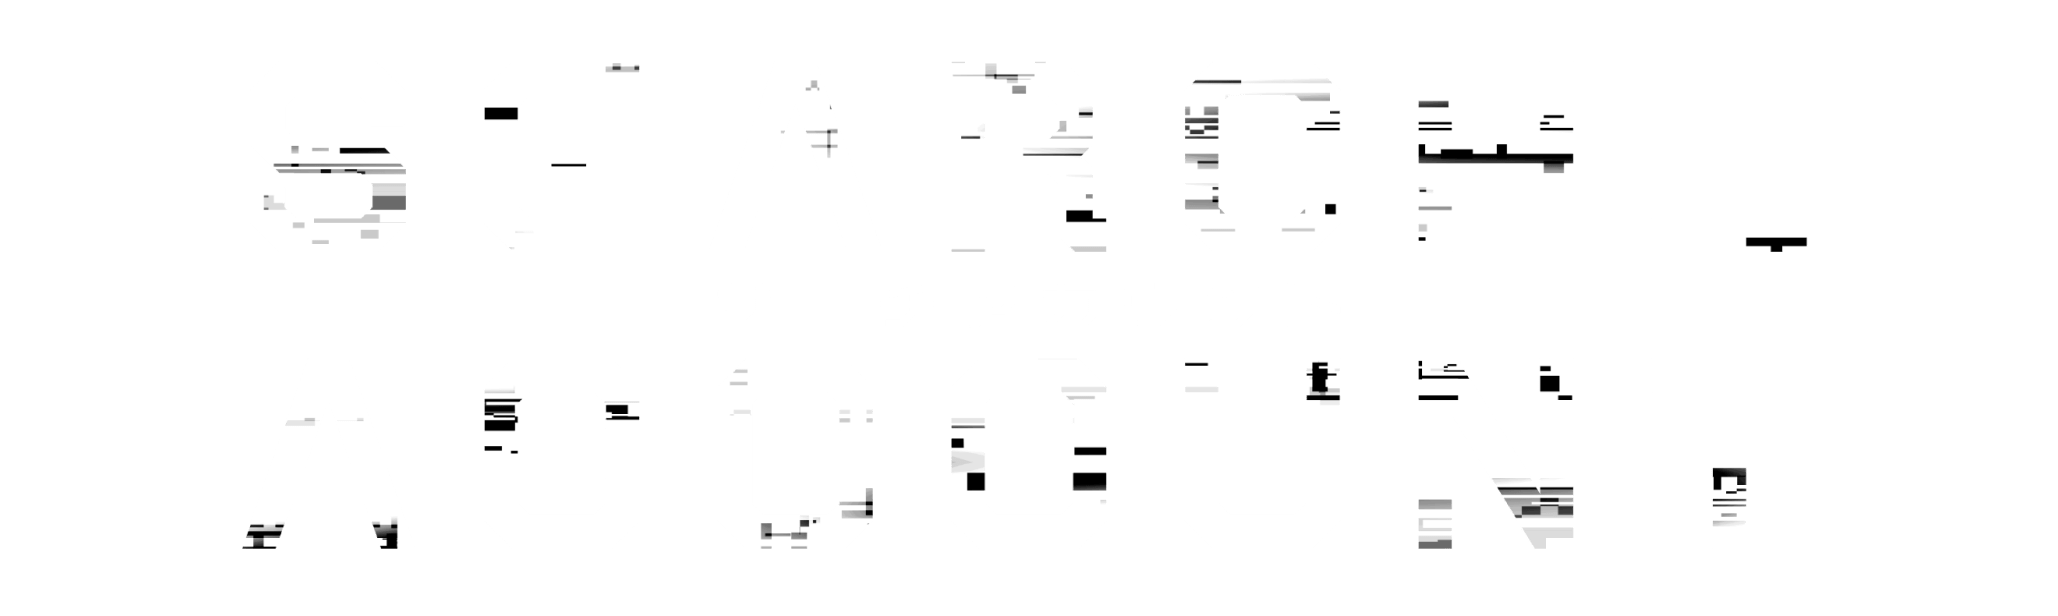 SEARCH ACCOUNT サーチアカウント